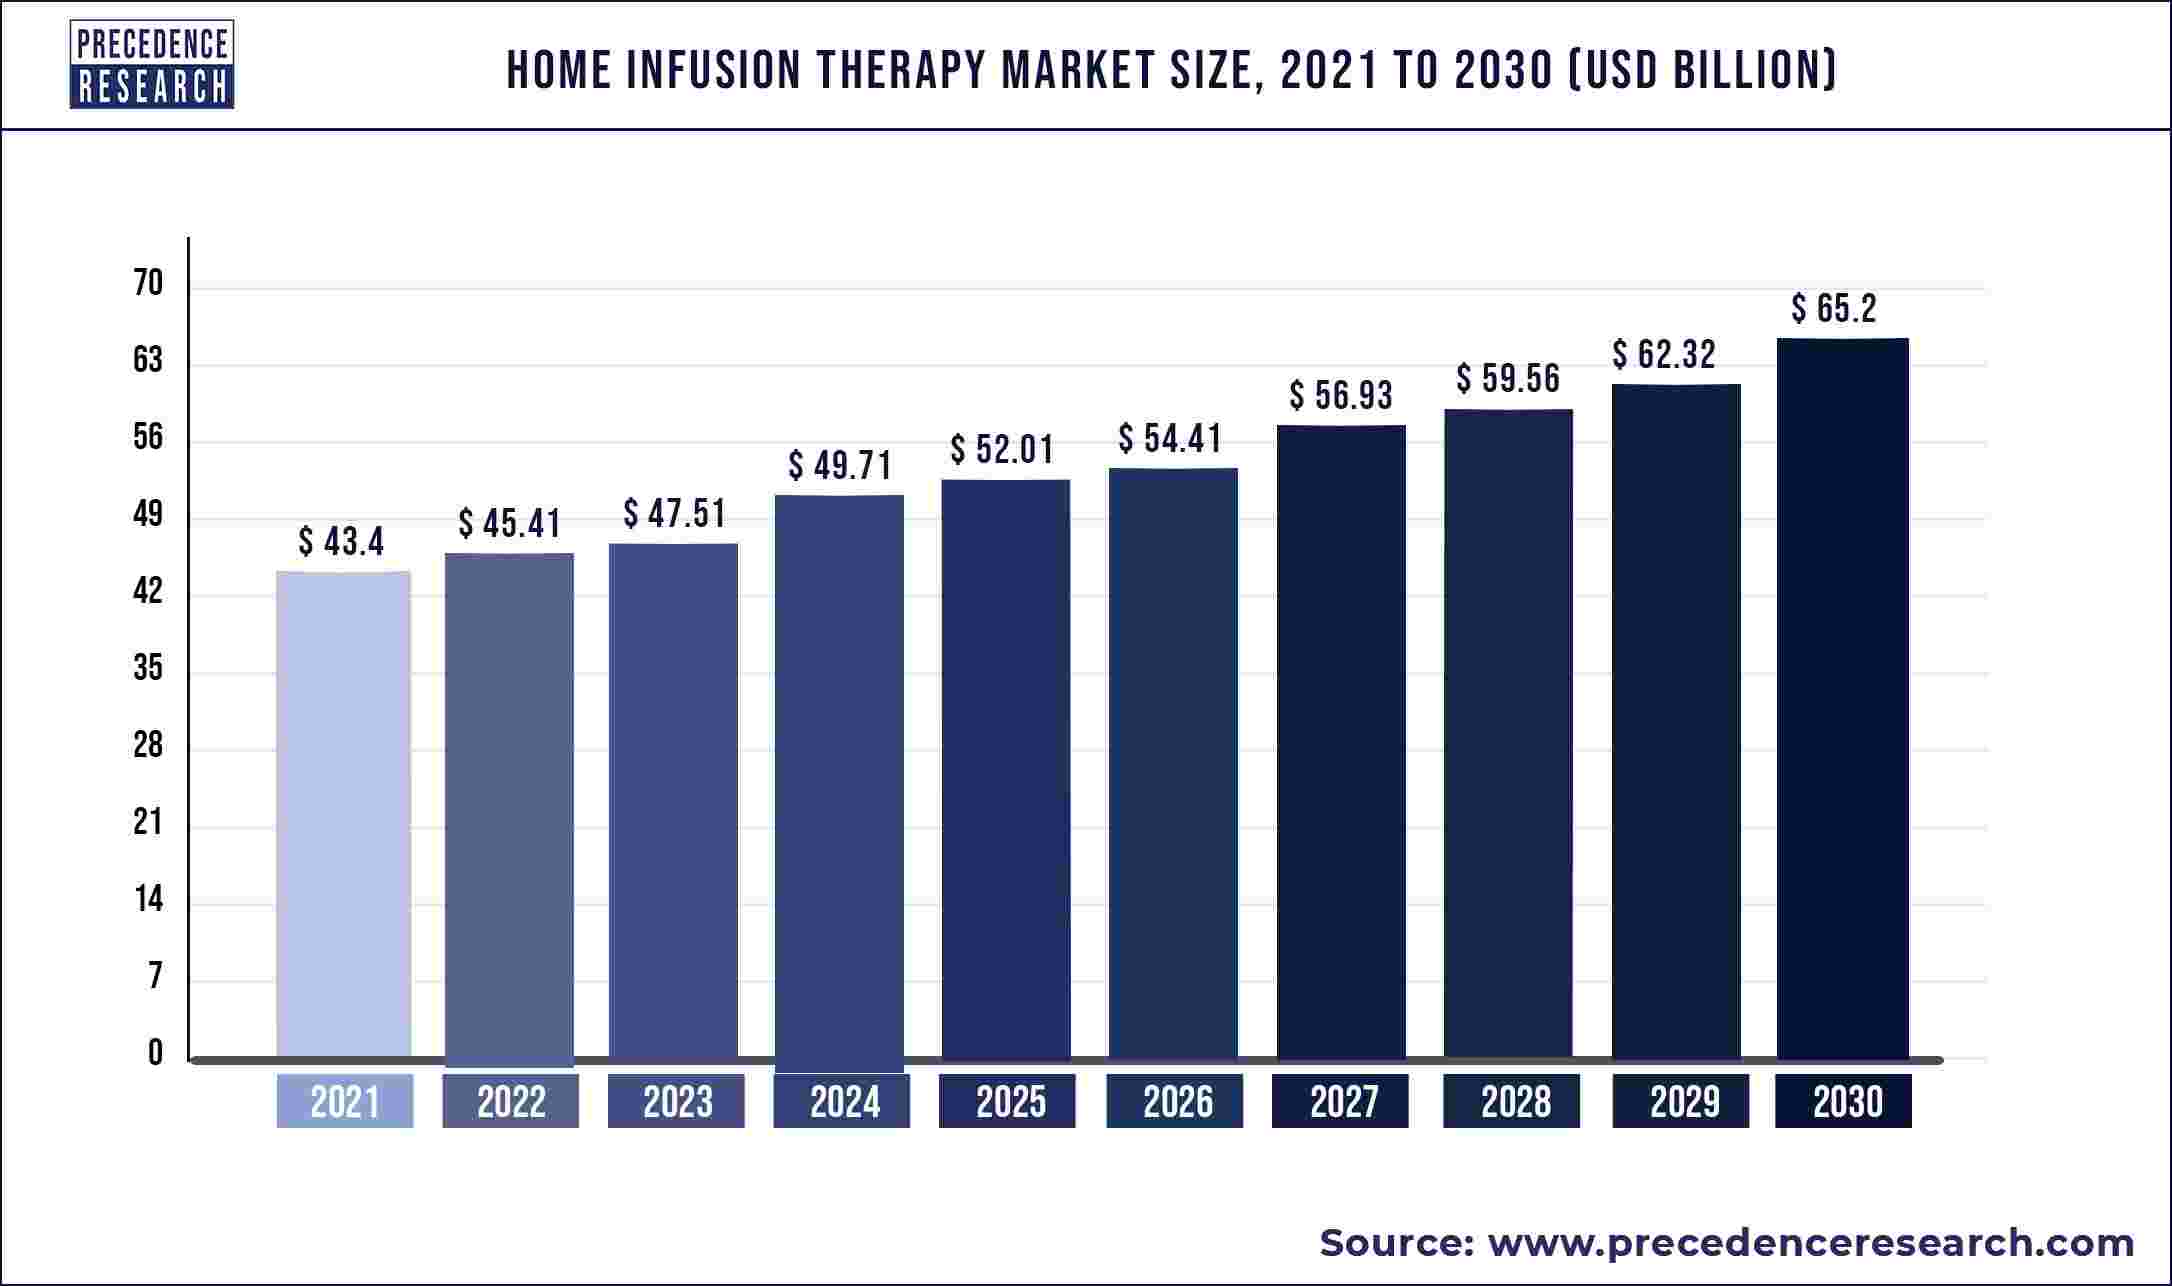 Home Infusion Therapy Market Size 2022 To 2030